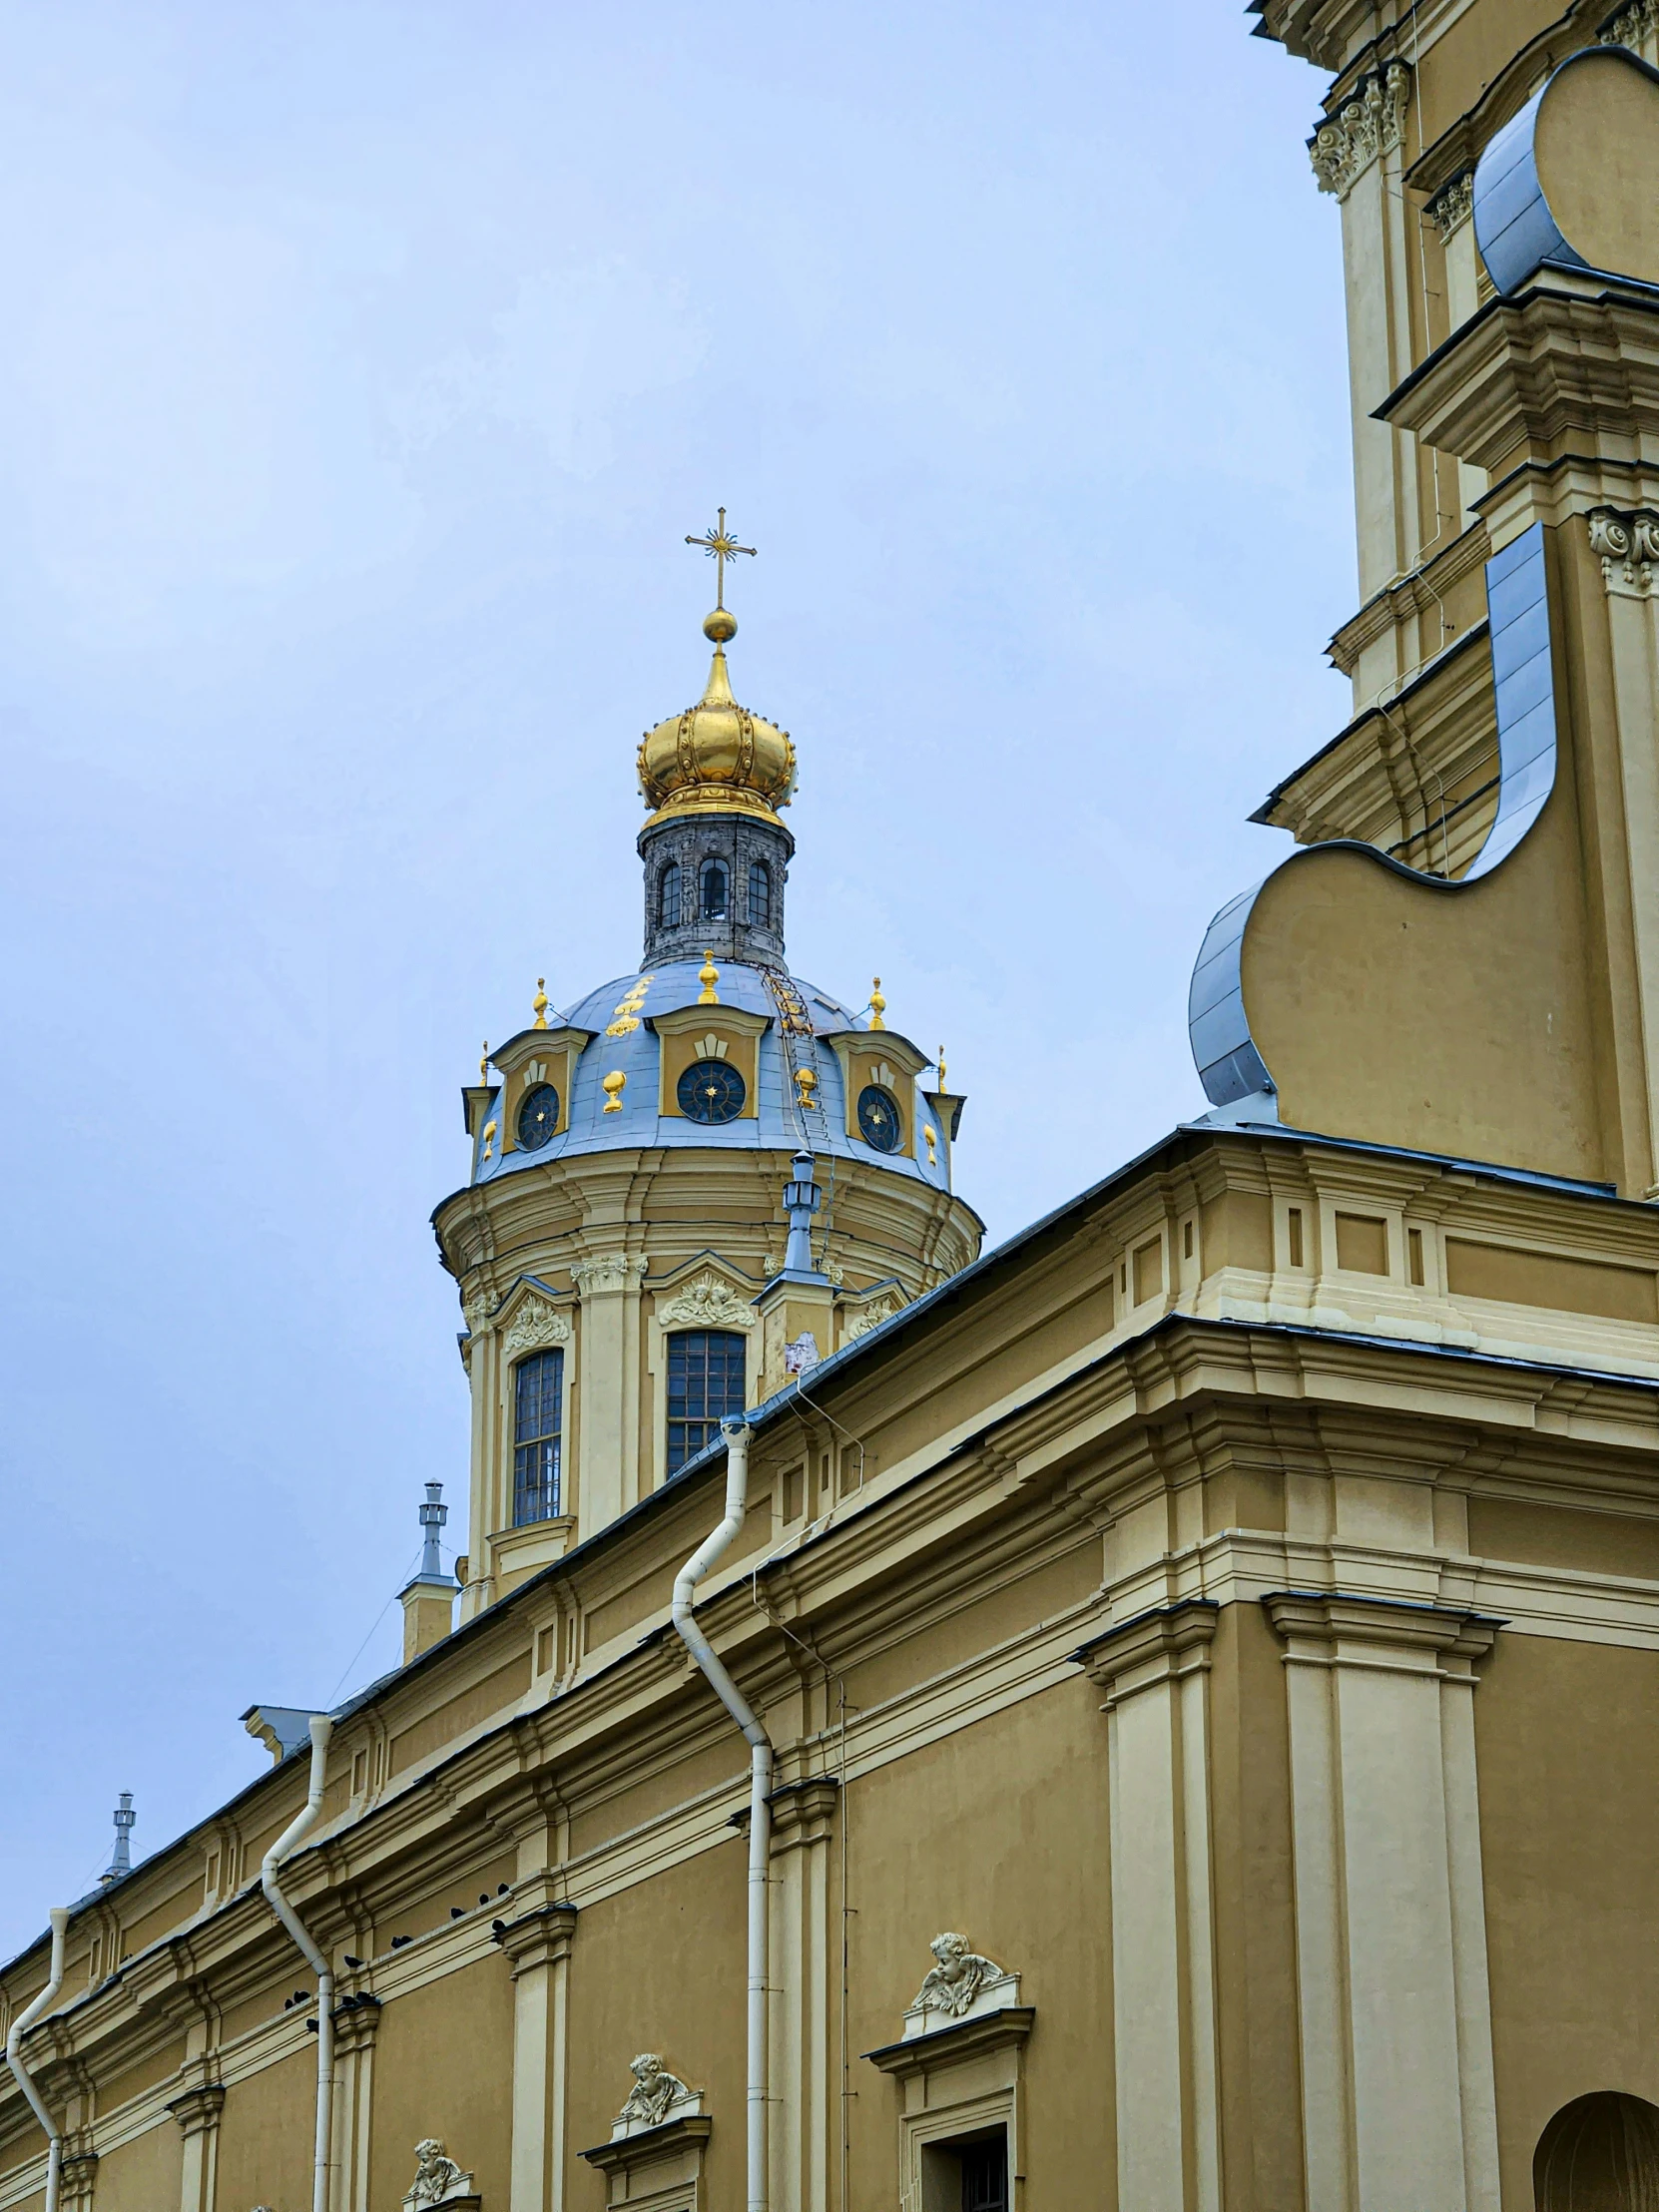 a church has an ornate tower and is tan with a gold spire